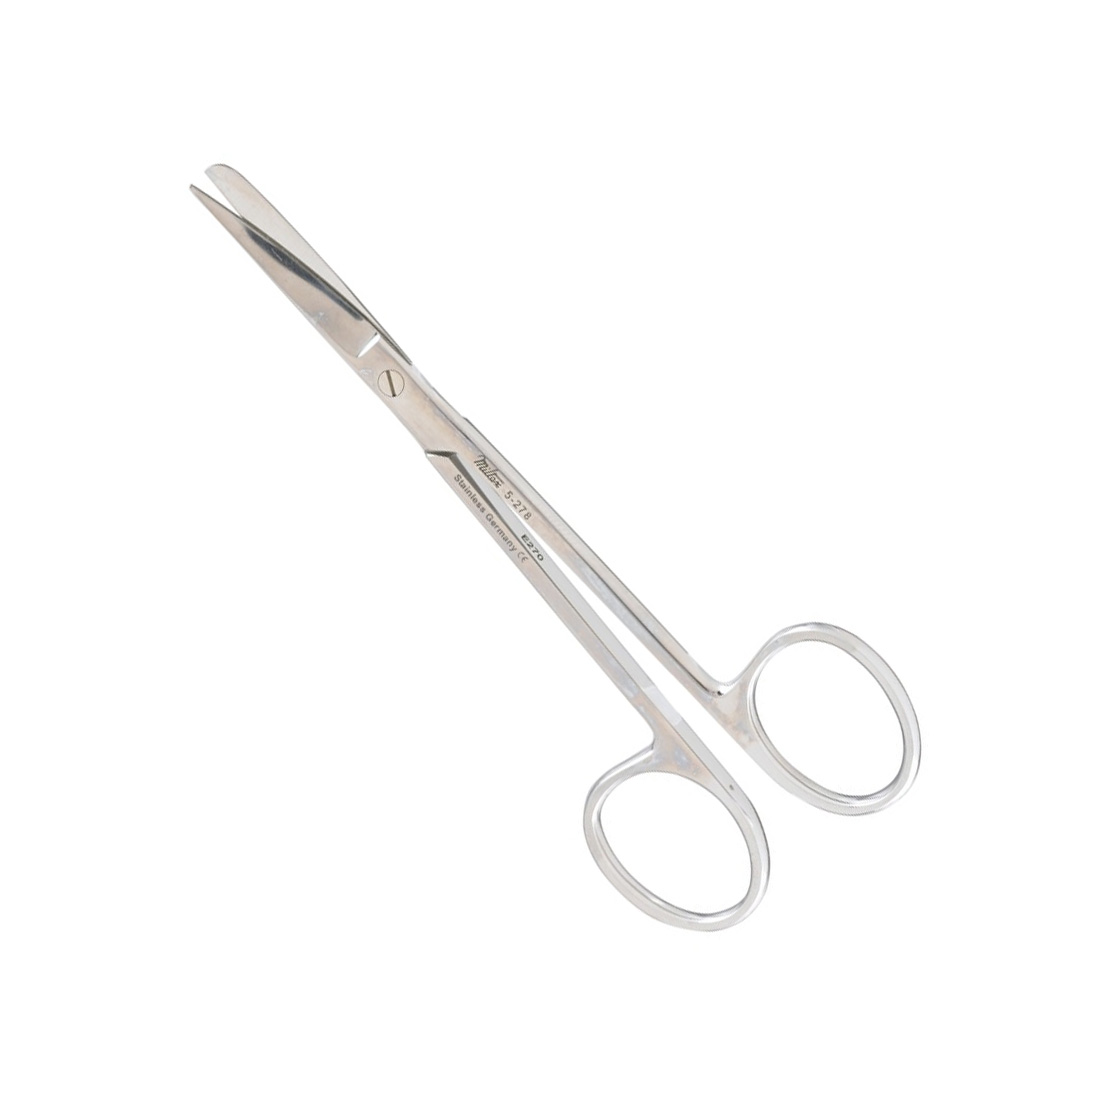 Wagner Plastic Surgery Scissors, Curved, Sharp-Blunt Points